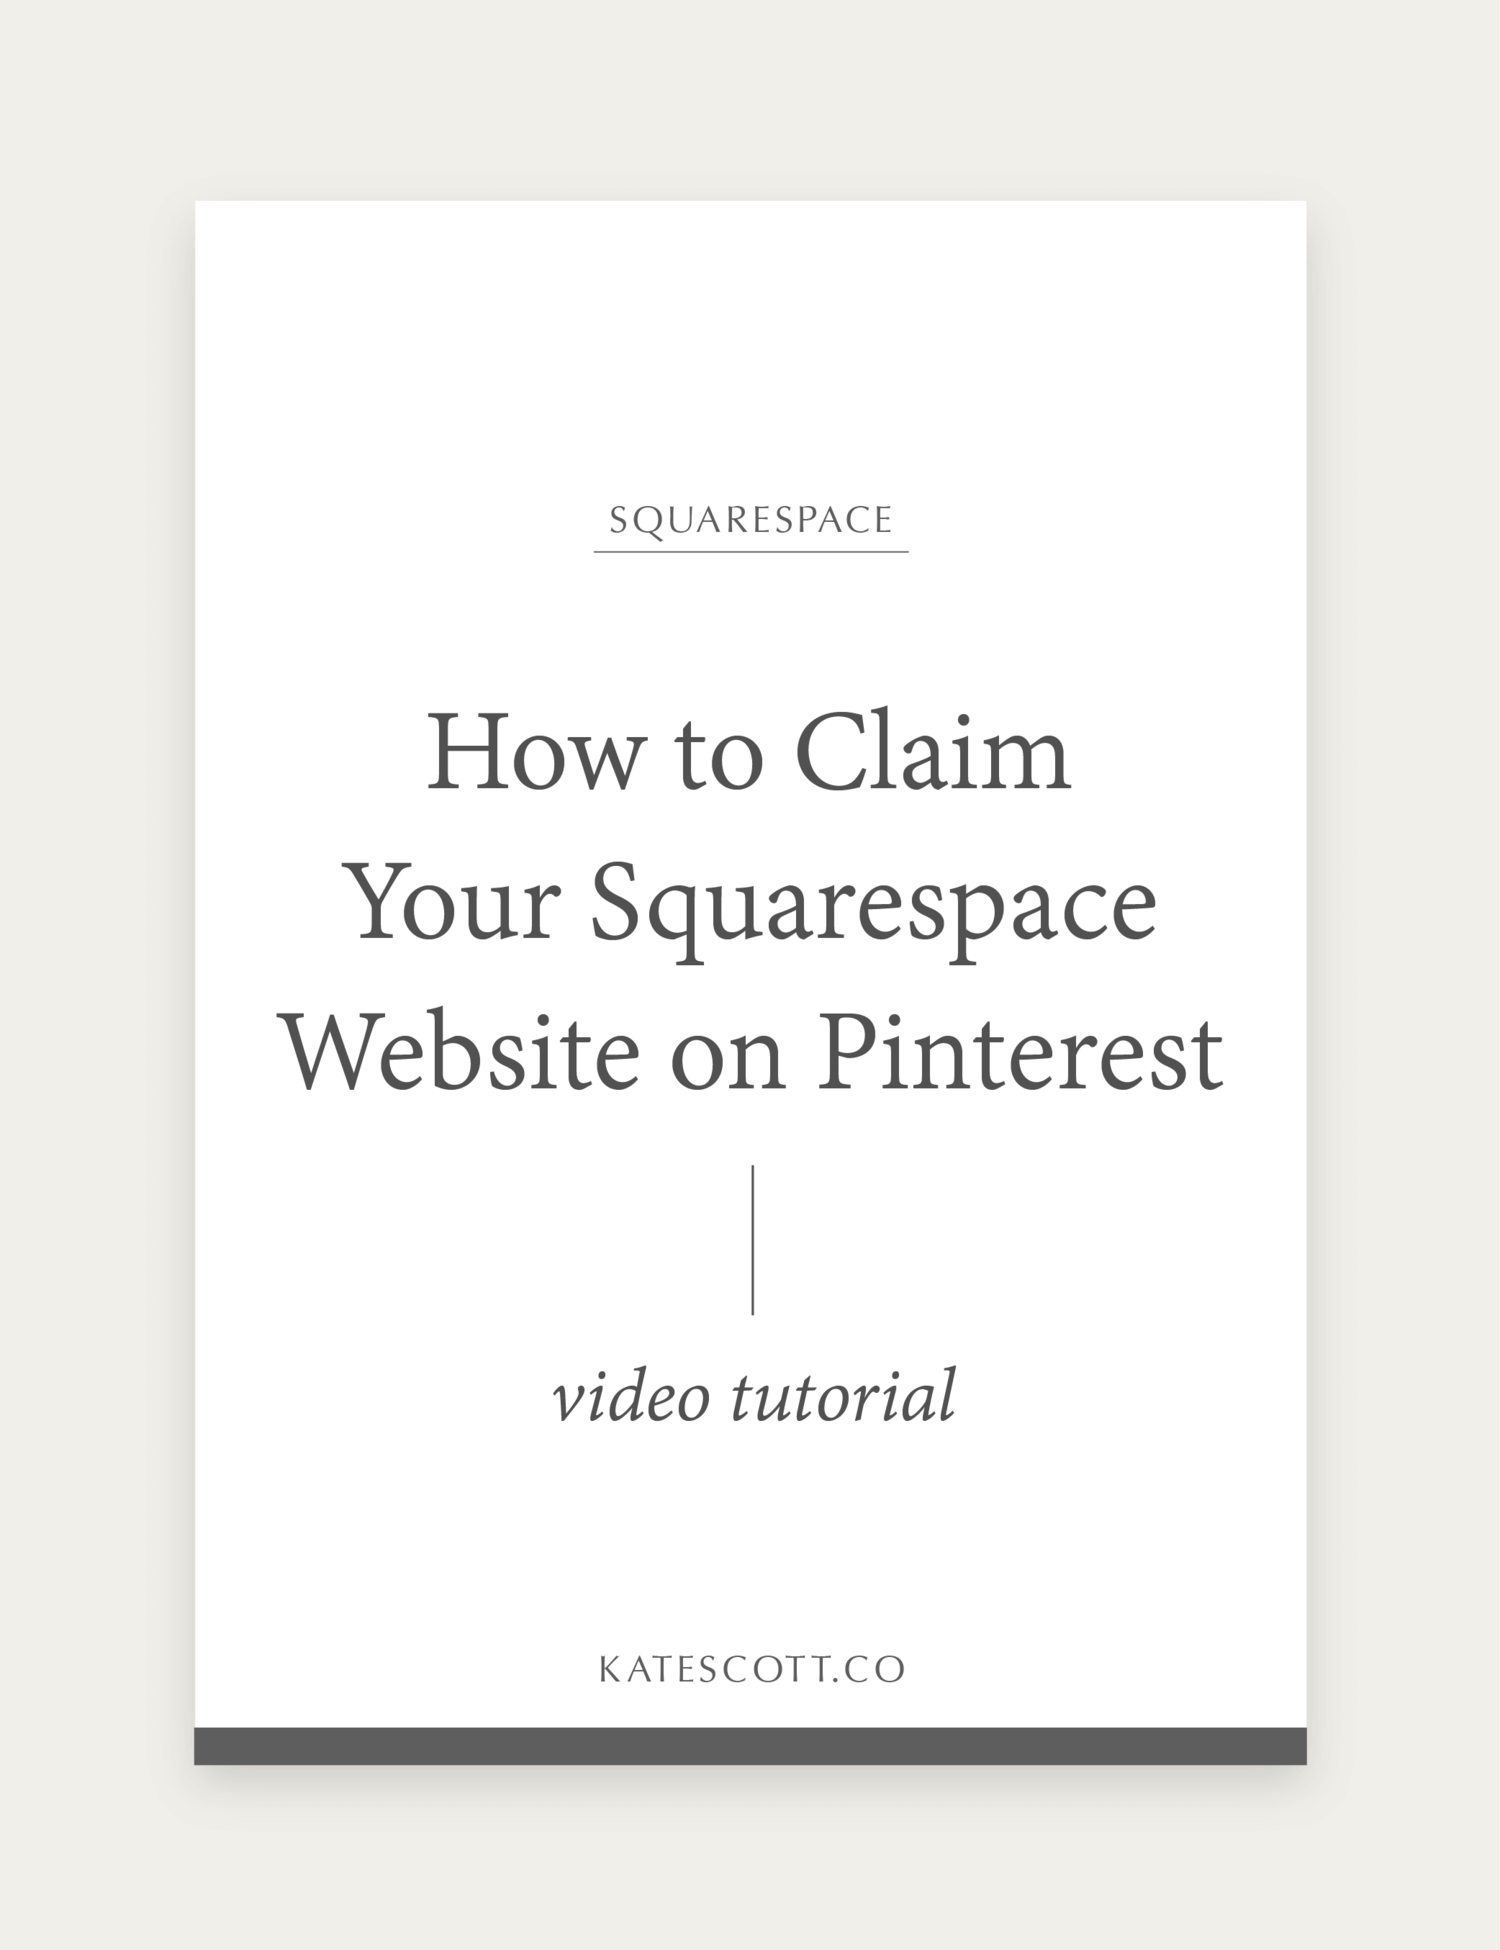 How to Claim Your Squarespace Website on Pinterest Kate Scott